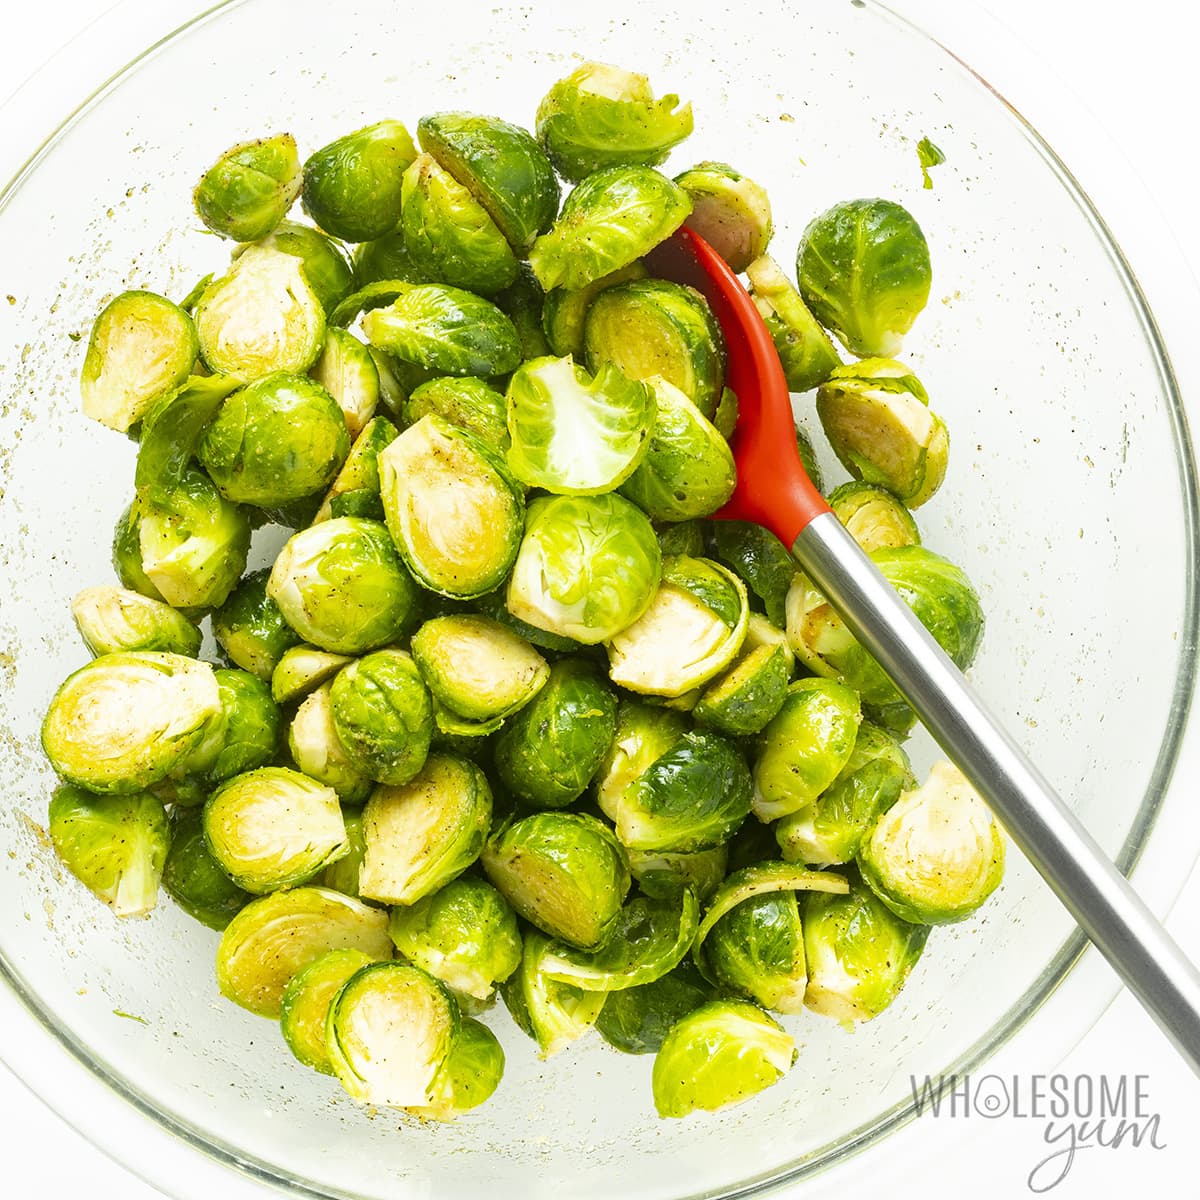 Toss the Brussels sprouts with salt, pepper, and garlic powder in the oil.